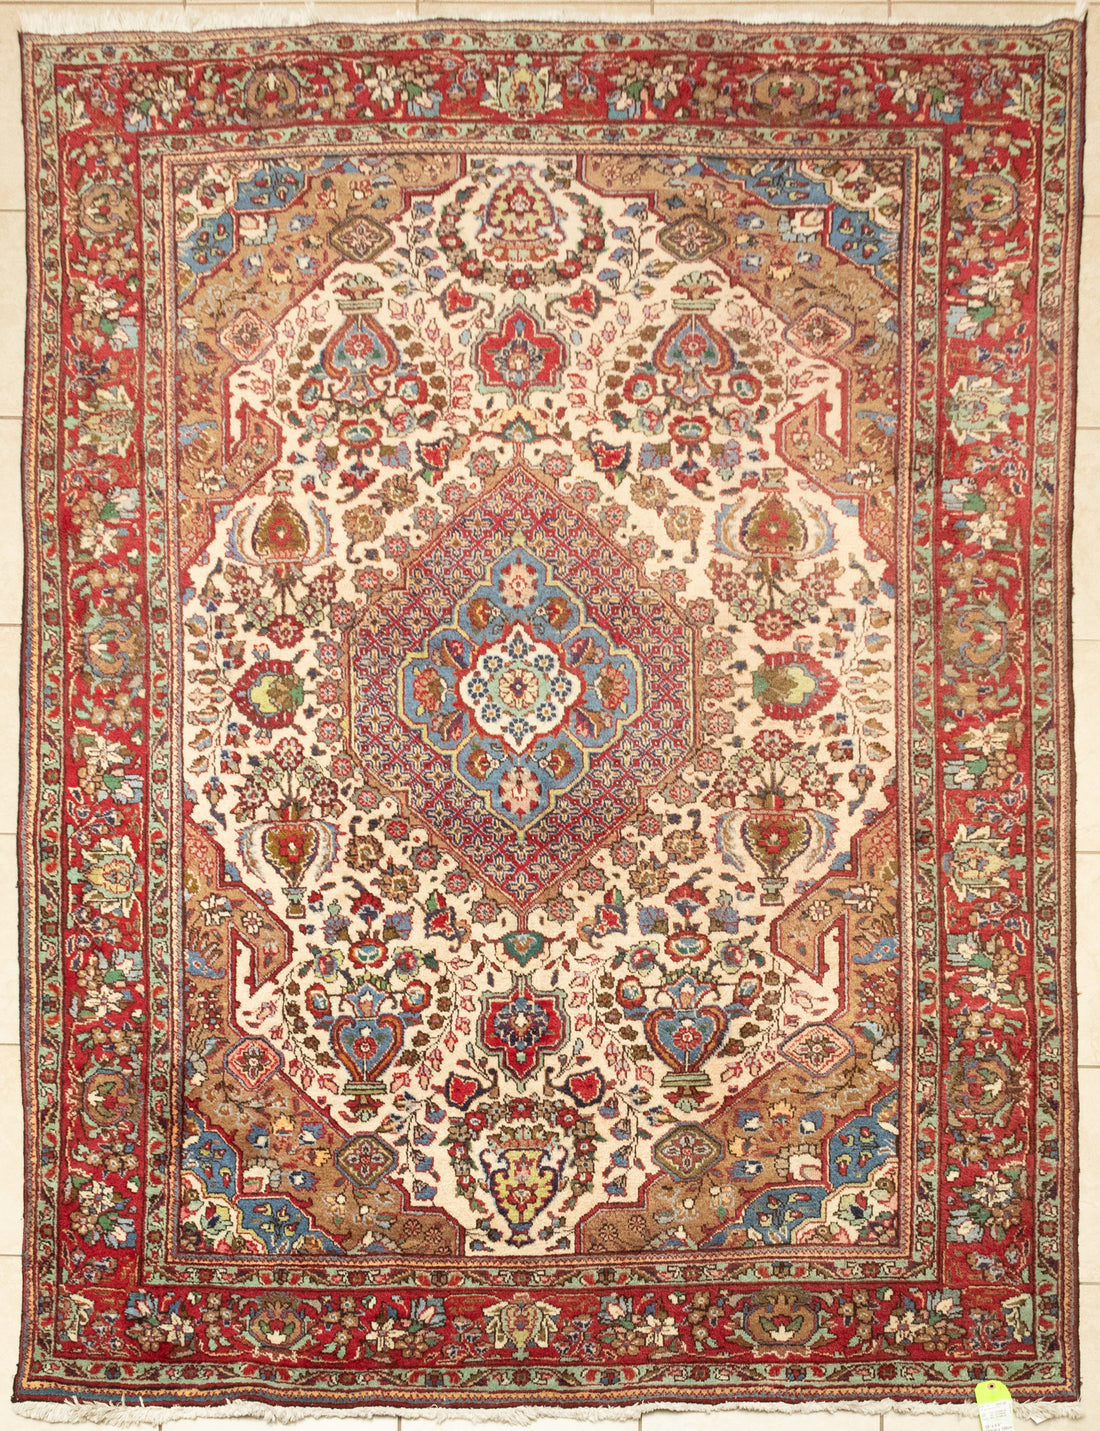 Hand-Knotted Wool Rug 10' x 6'6"